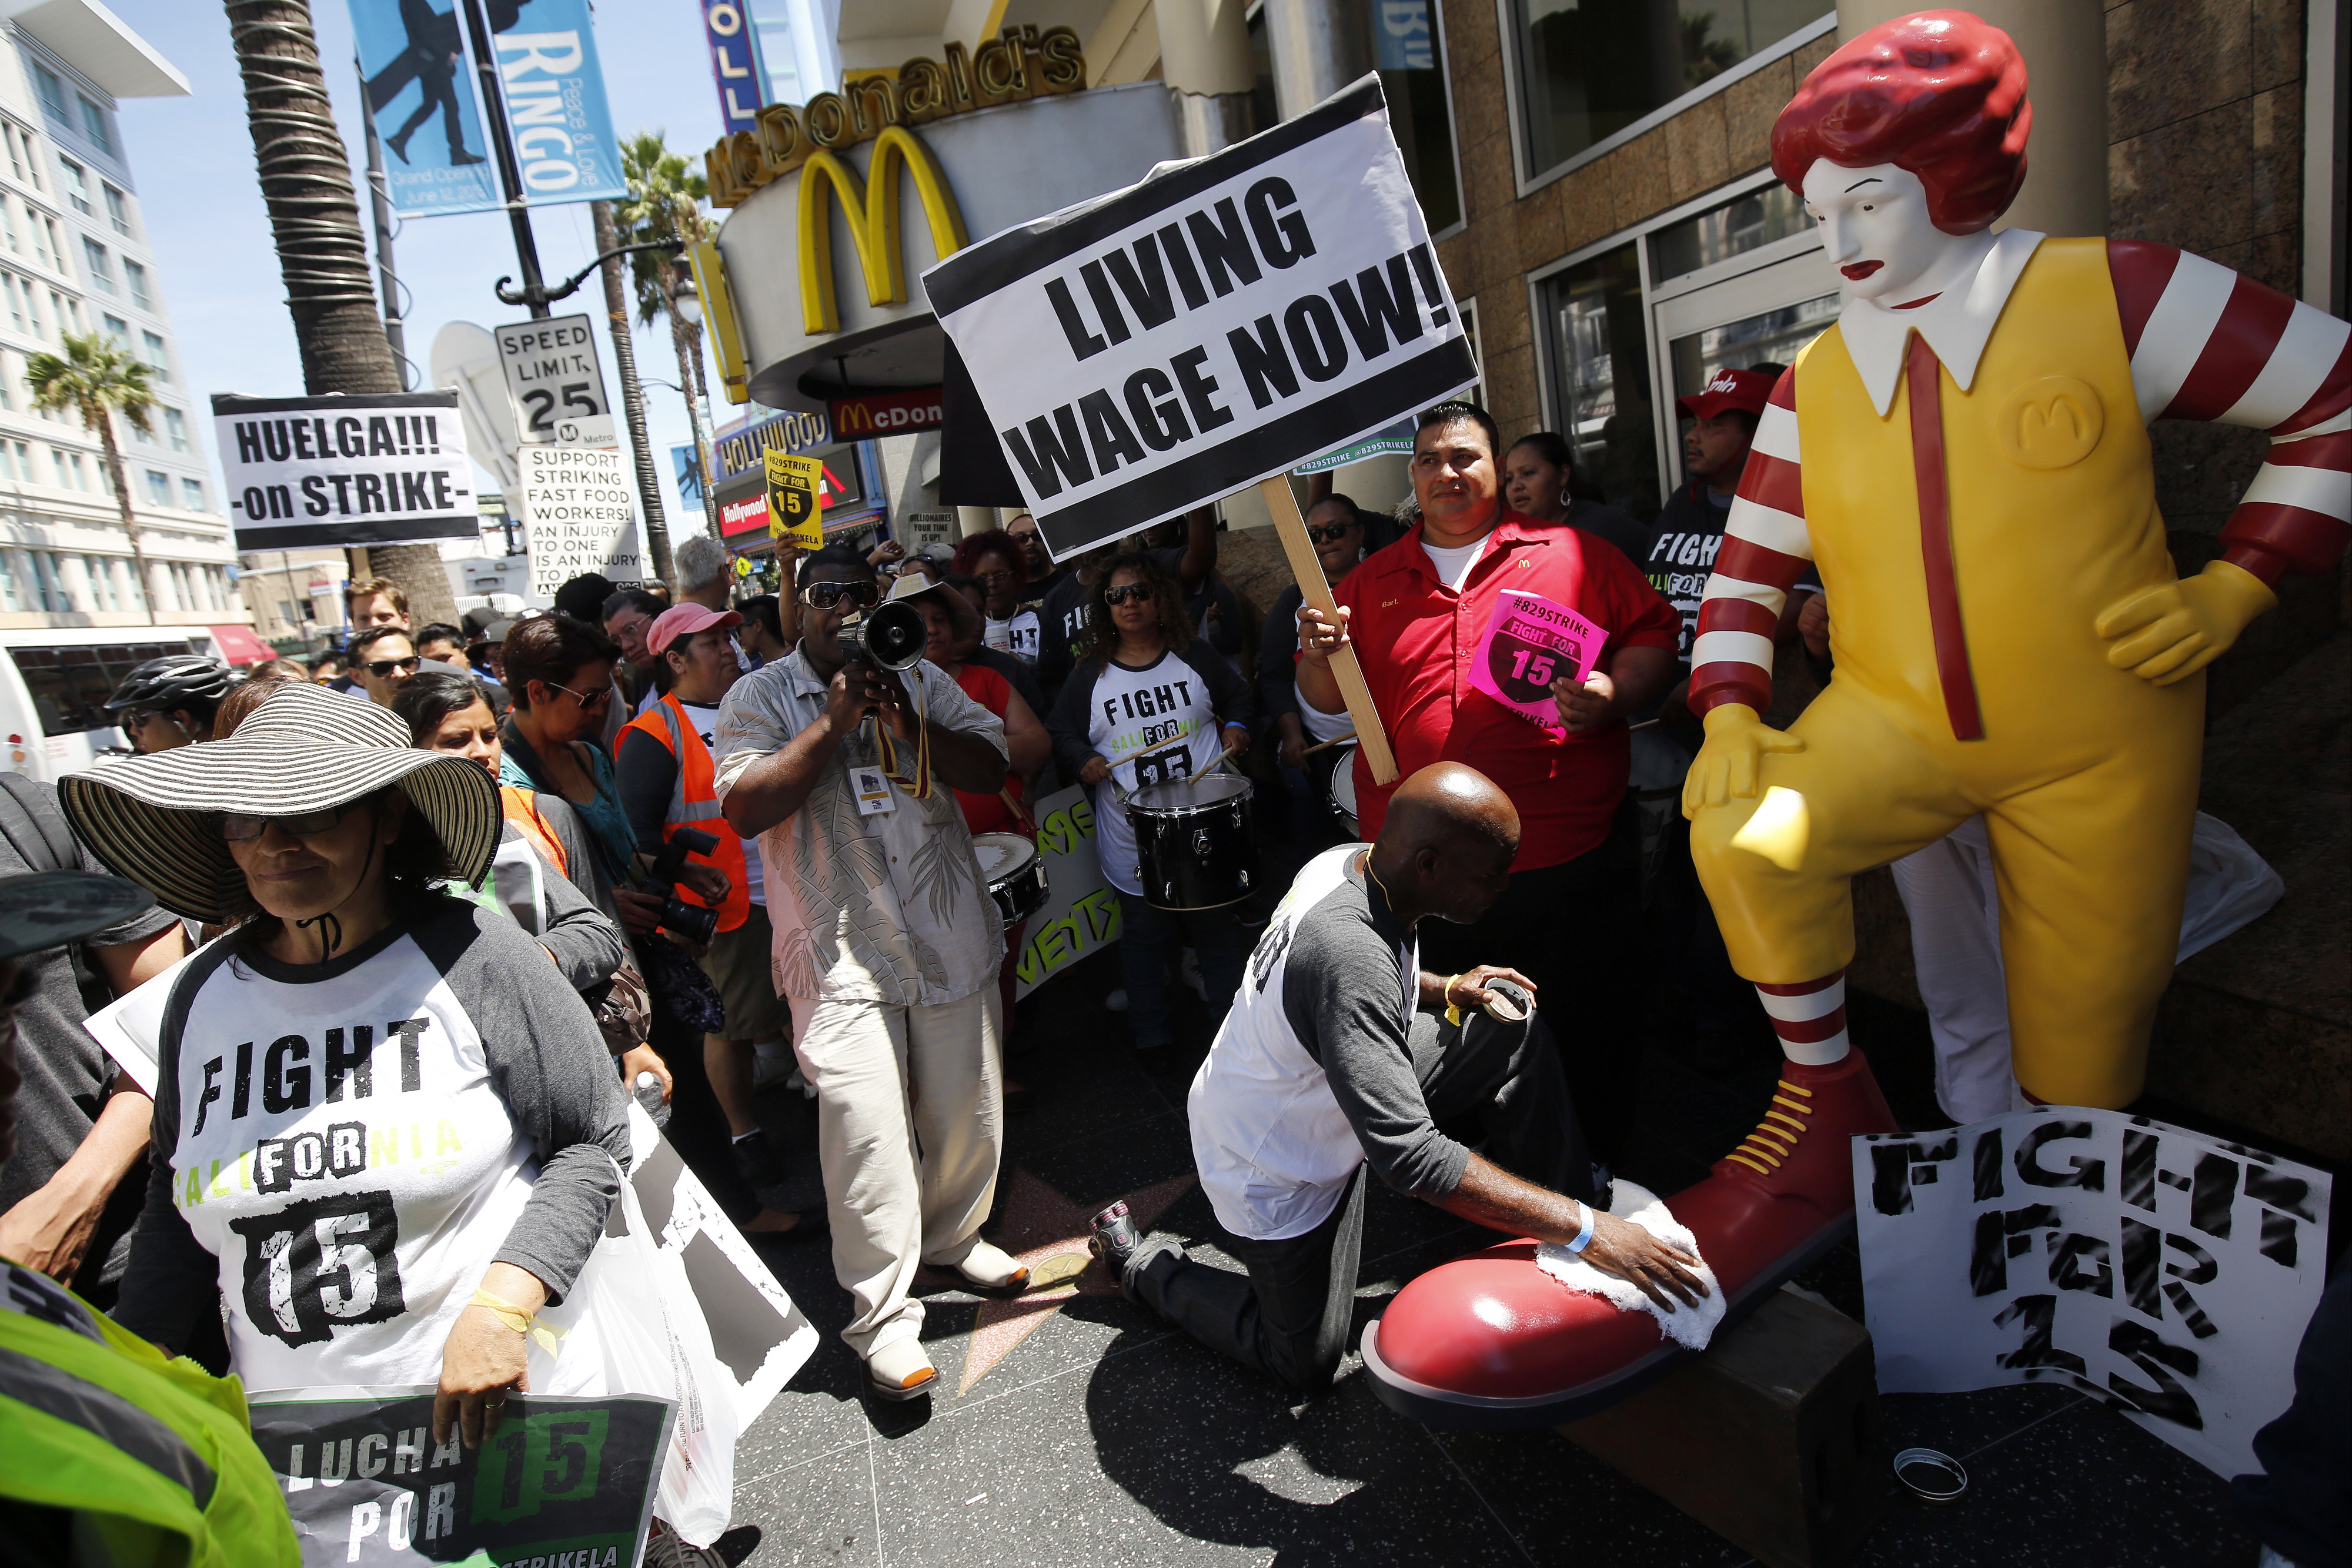 Robert Wideman, a maintenance mechanic at McDonalds Corp., shines the shoes of a Ronald McDonald statue outside of a restaurant while protesting with fast-food workers and supporters organized by the Service Employees International Union (SEIU) in Los Angeles, California, U.S., on Thursday, Aug. 29, 2013. (Bloomberg—Bloomberg via Getty Images)